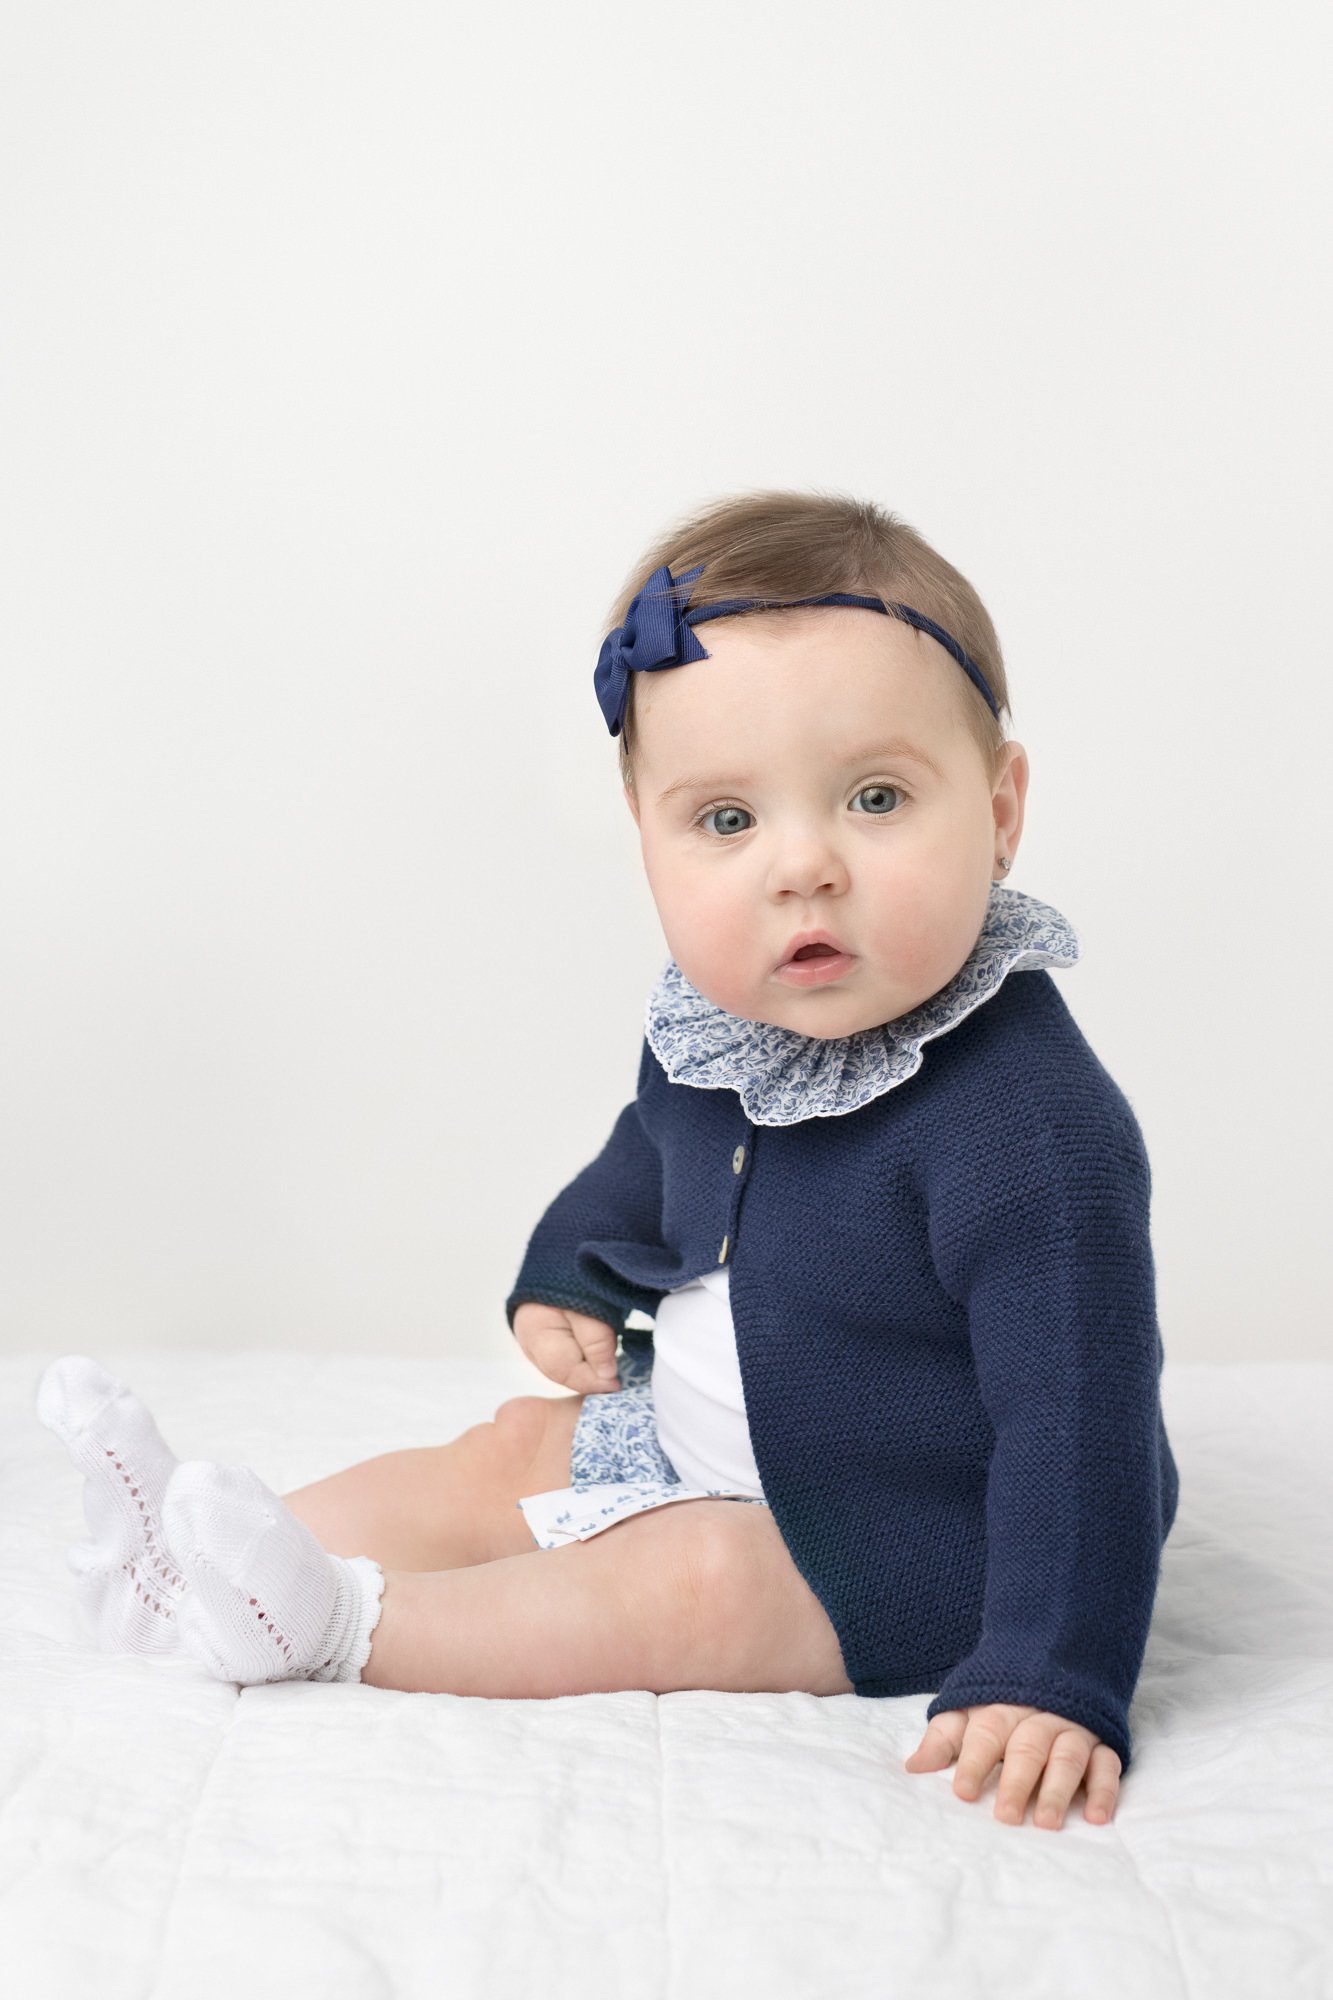  Young baby sitting up with a thoughtful look in an all white studio captured by Nicole Hawkins Photography in New Jersey area. Baby is wearing socks and a darling blue sweater with a white ruffle collar #babystudioportraits #studionewborns #NewJerse